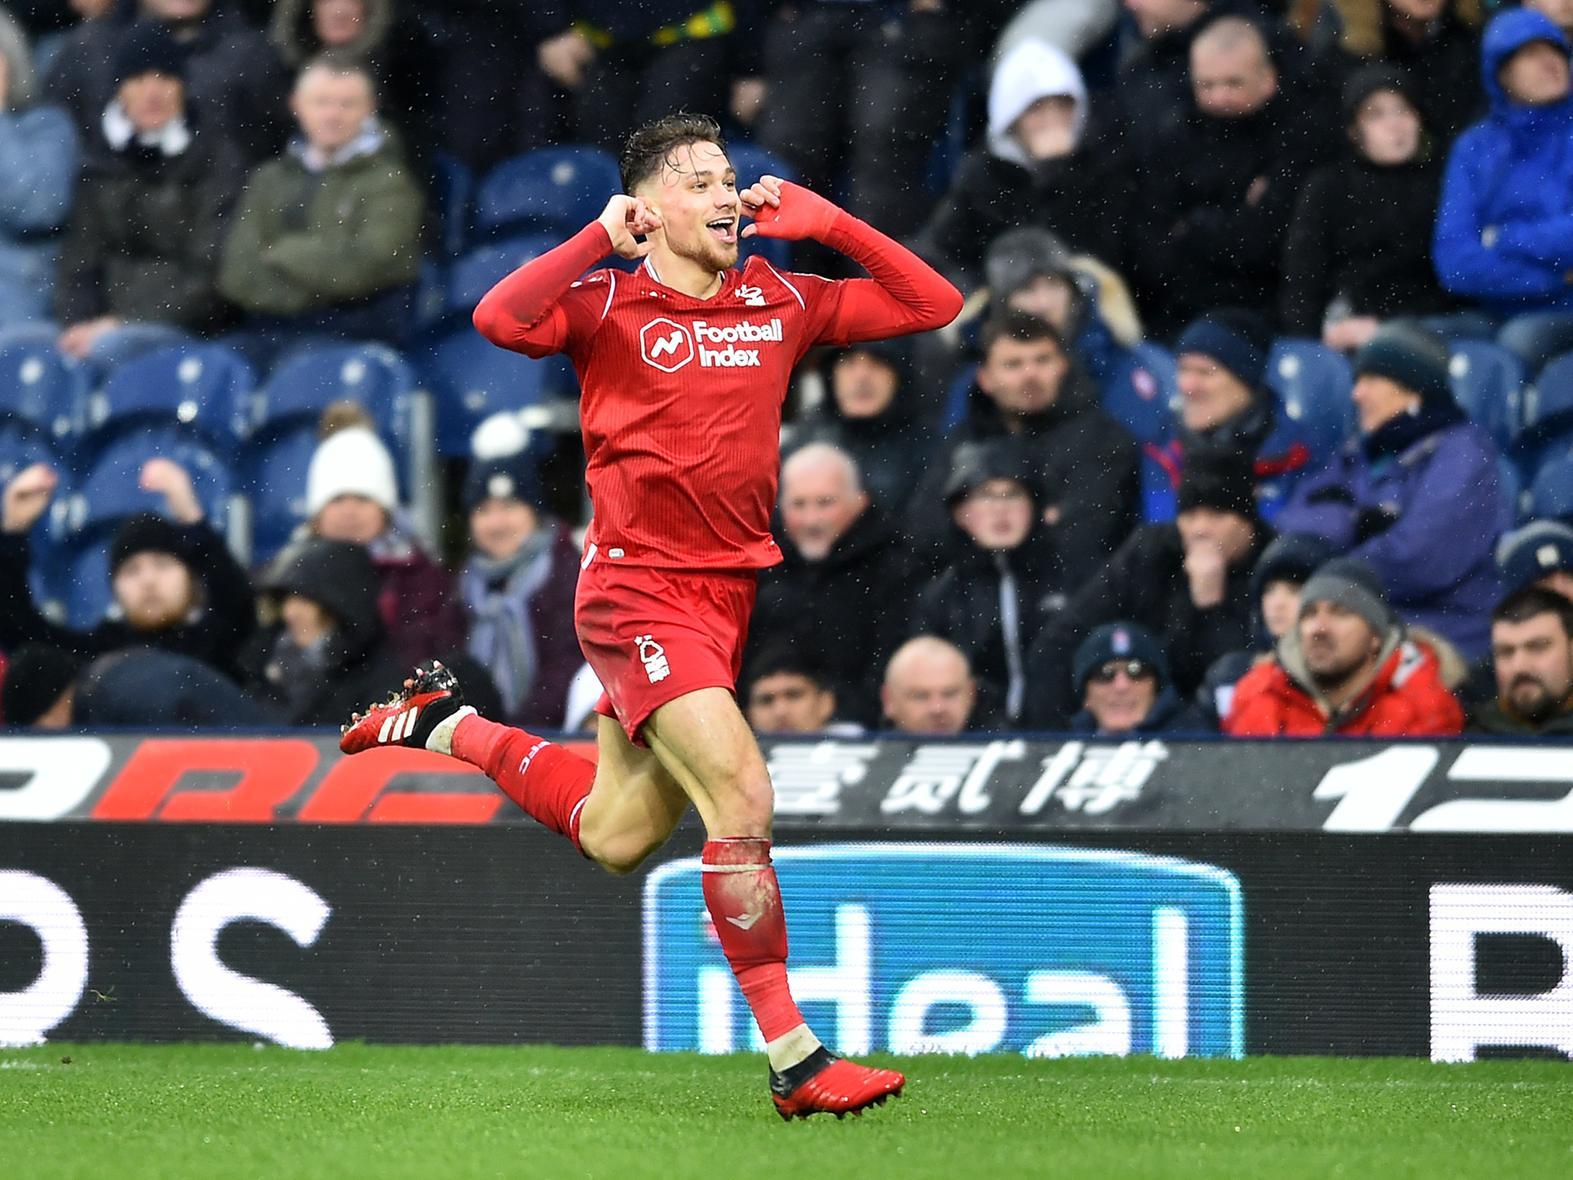 Nottingham Forest man Cash was linked with AC Milan in January, and showed why with a stunning last-gasp equaliser to earn a point at West Bromwich Albion.